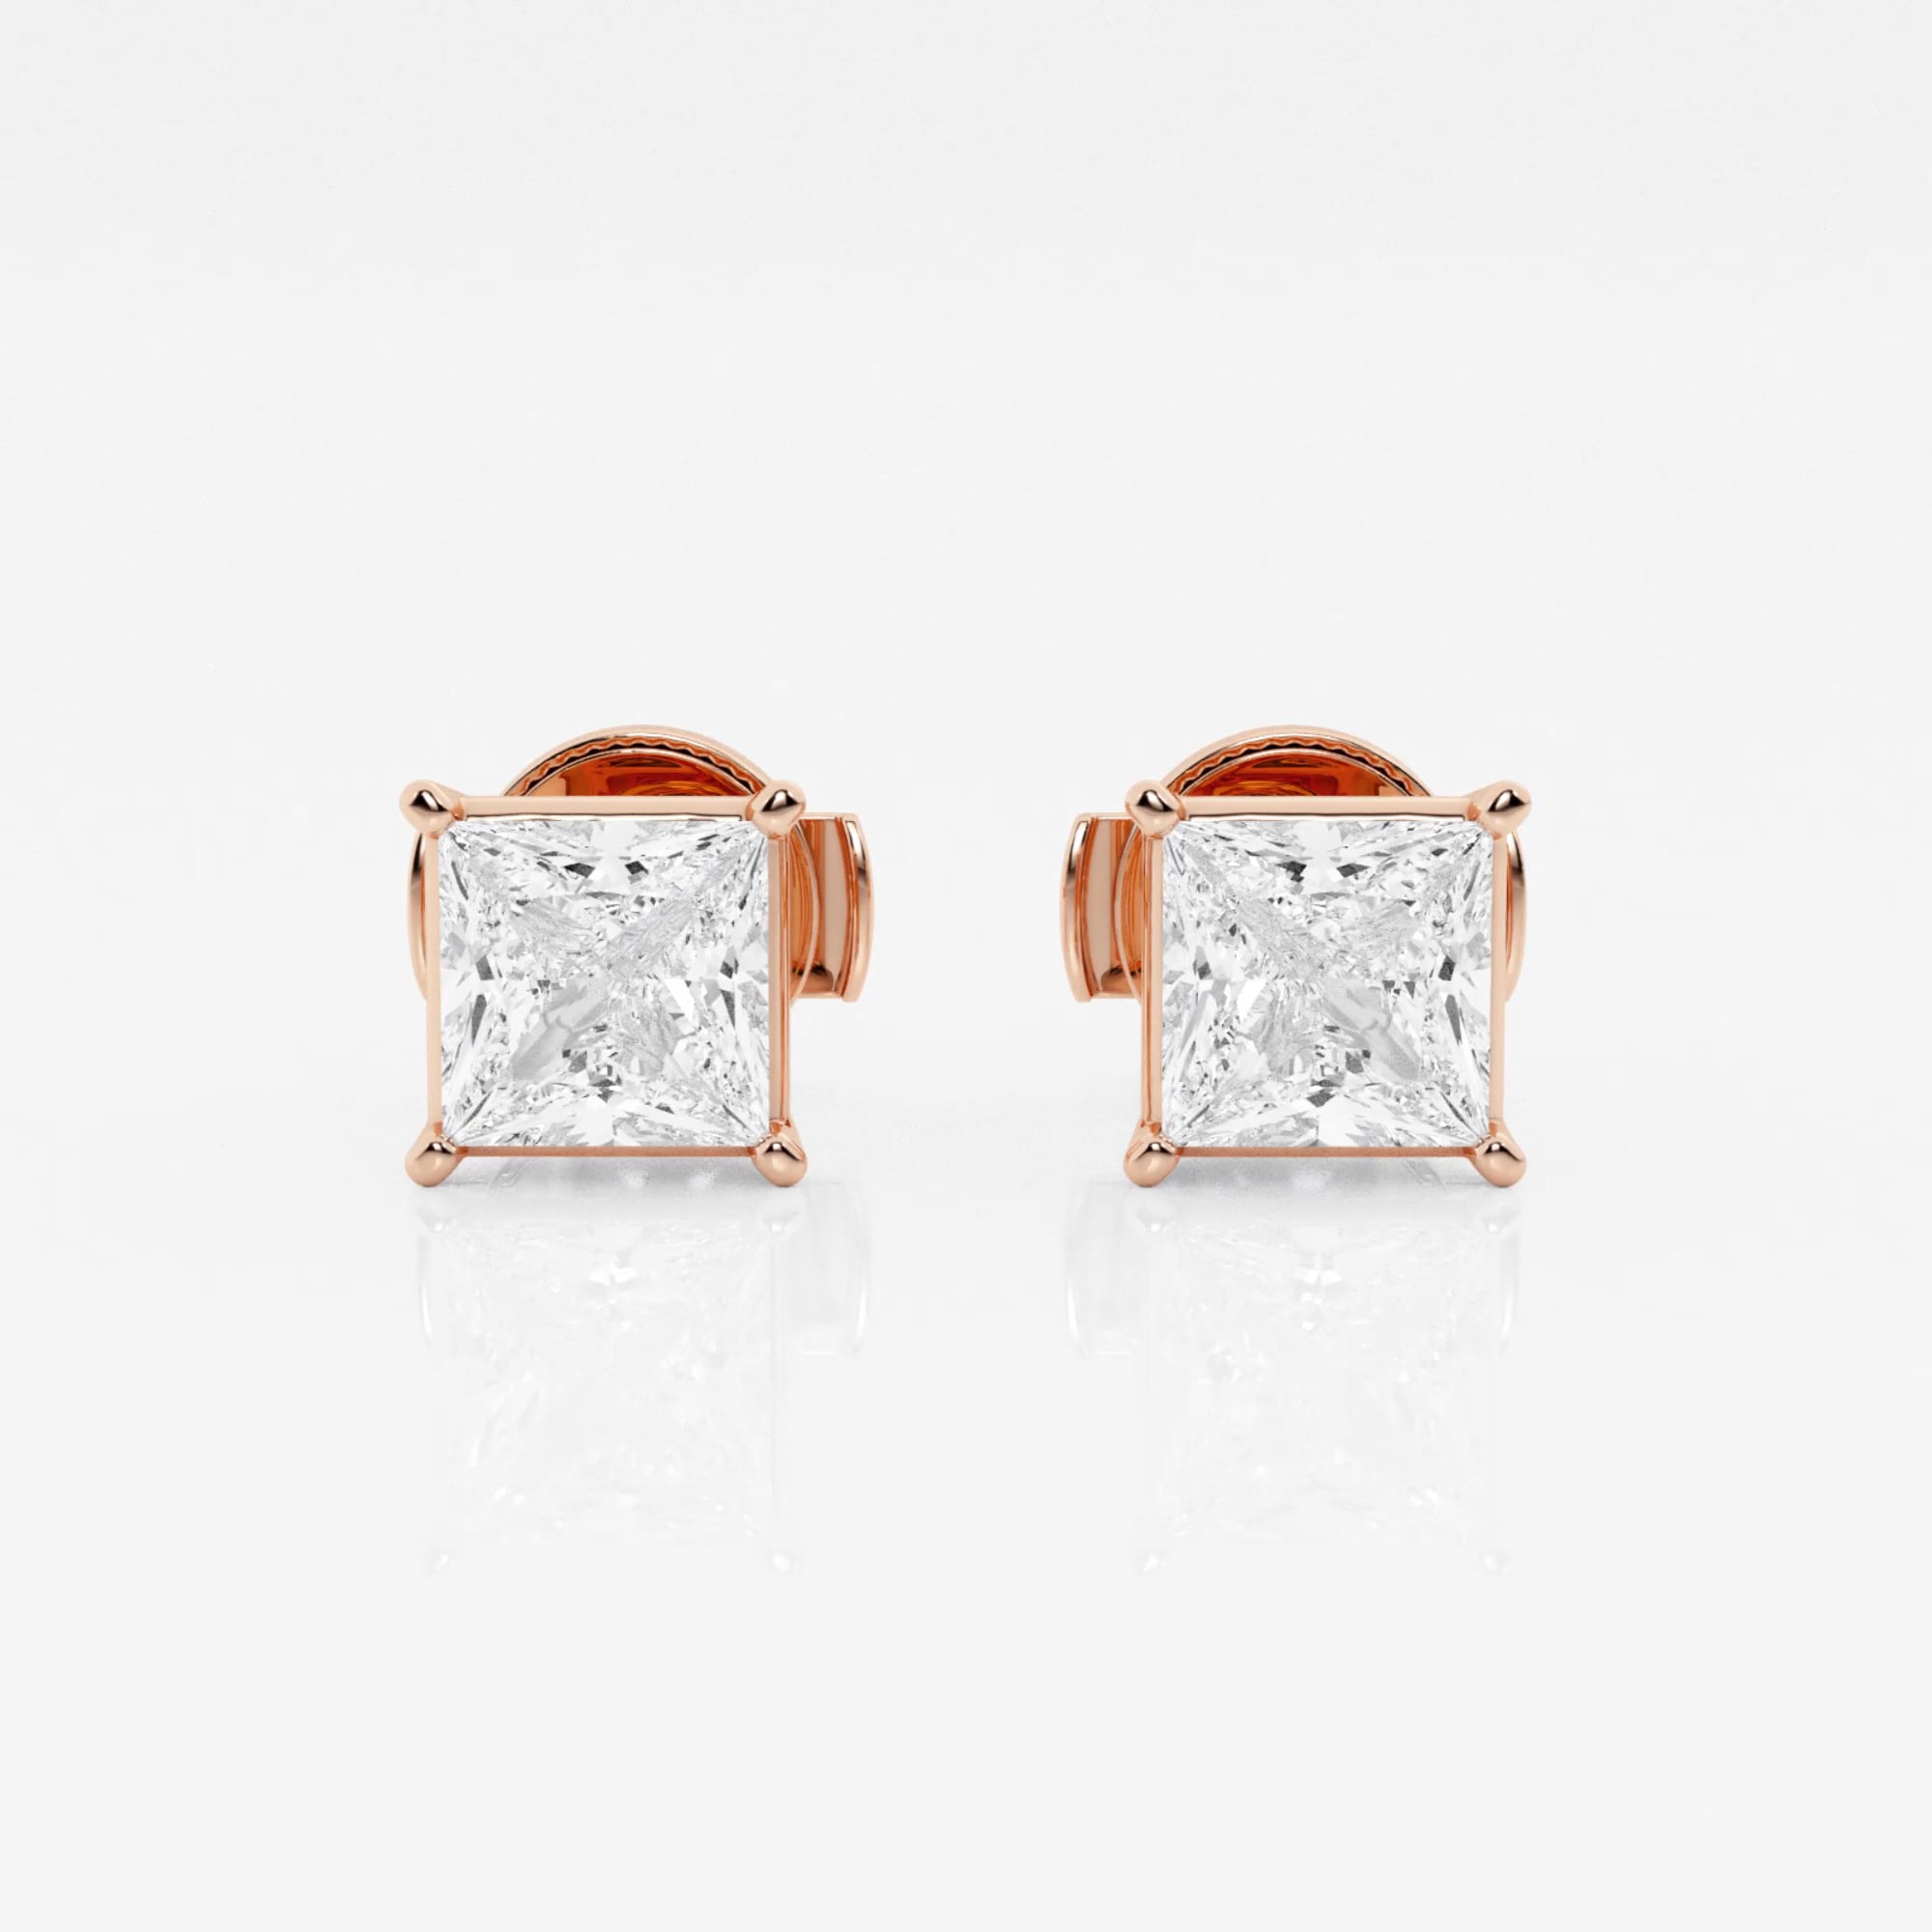 product video for 1 1/2 ctw Princess Lab Grown Diamond Solitaire Certified Stud Earrings